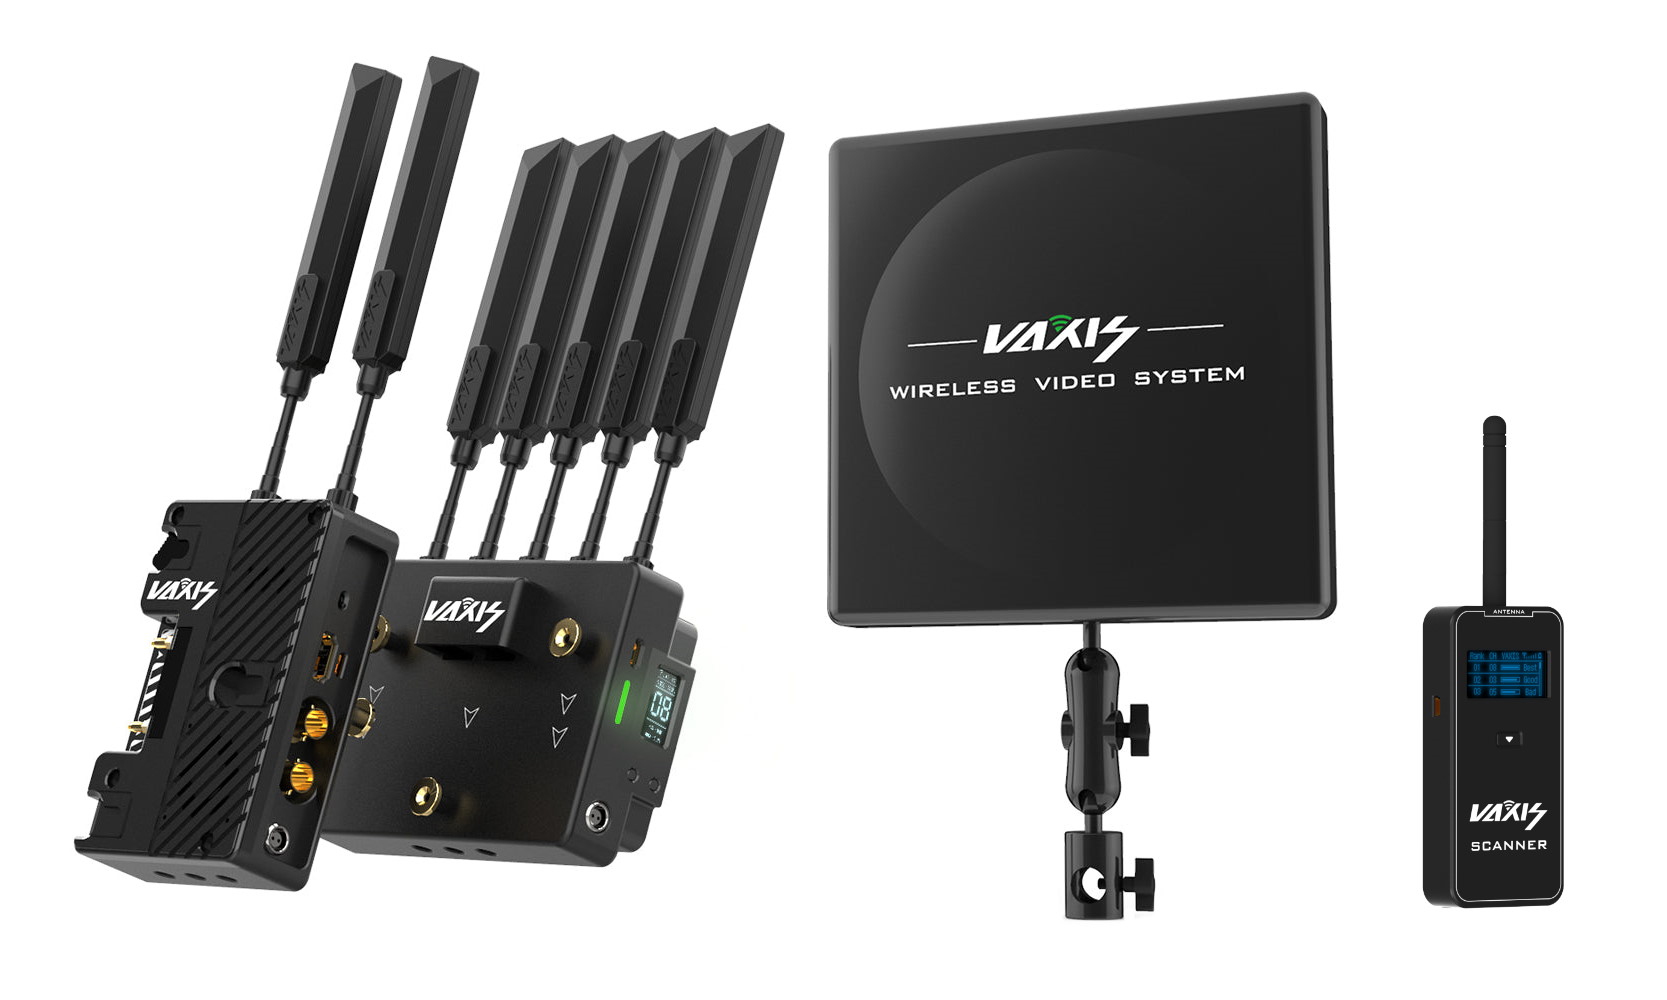 Vaxis Storm 3000DG with array antenna and channel scanner